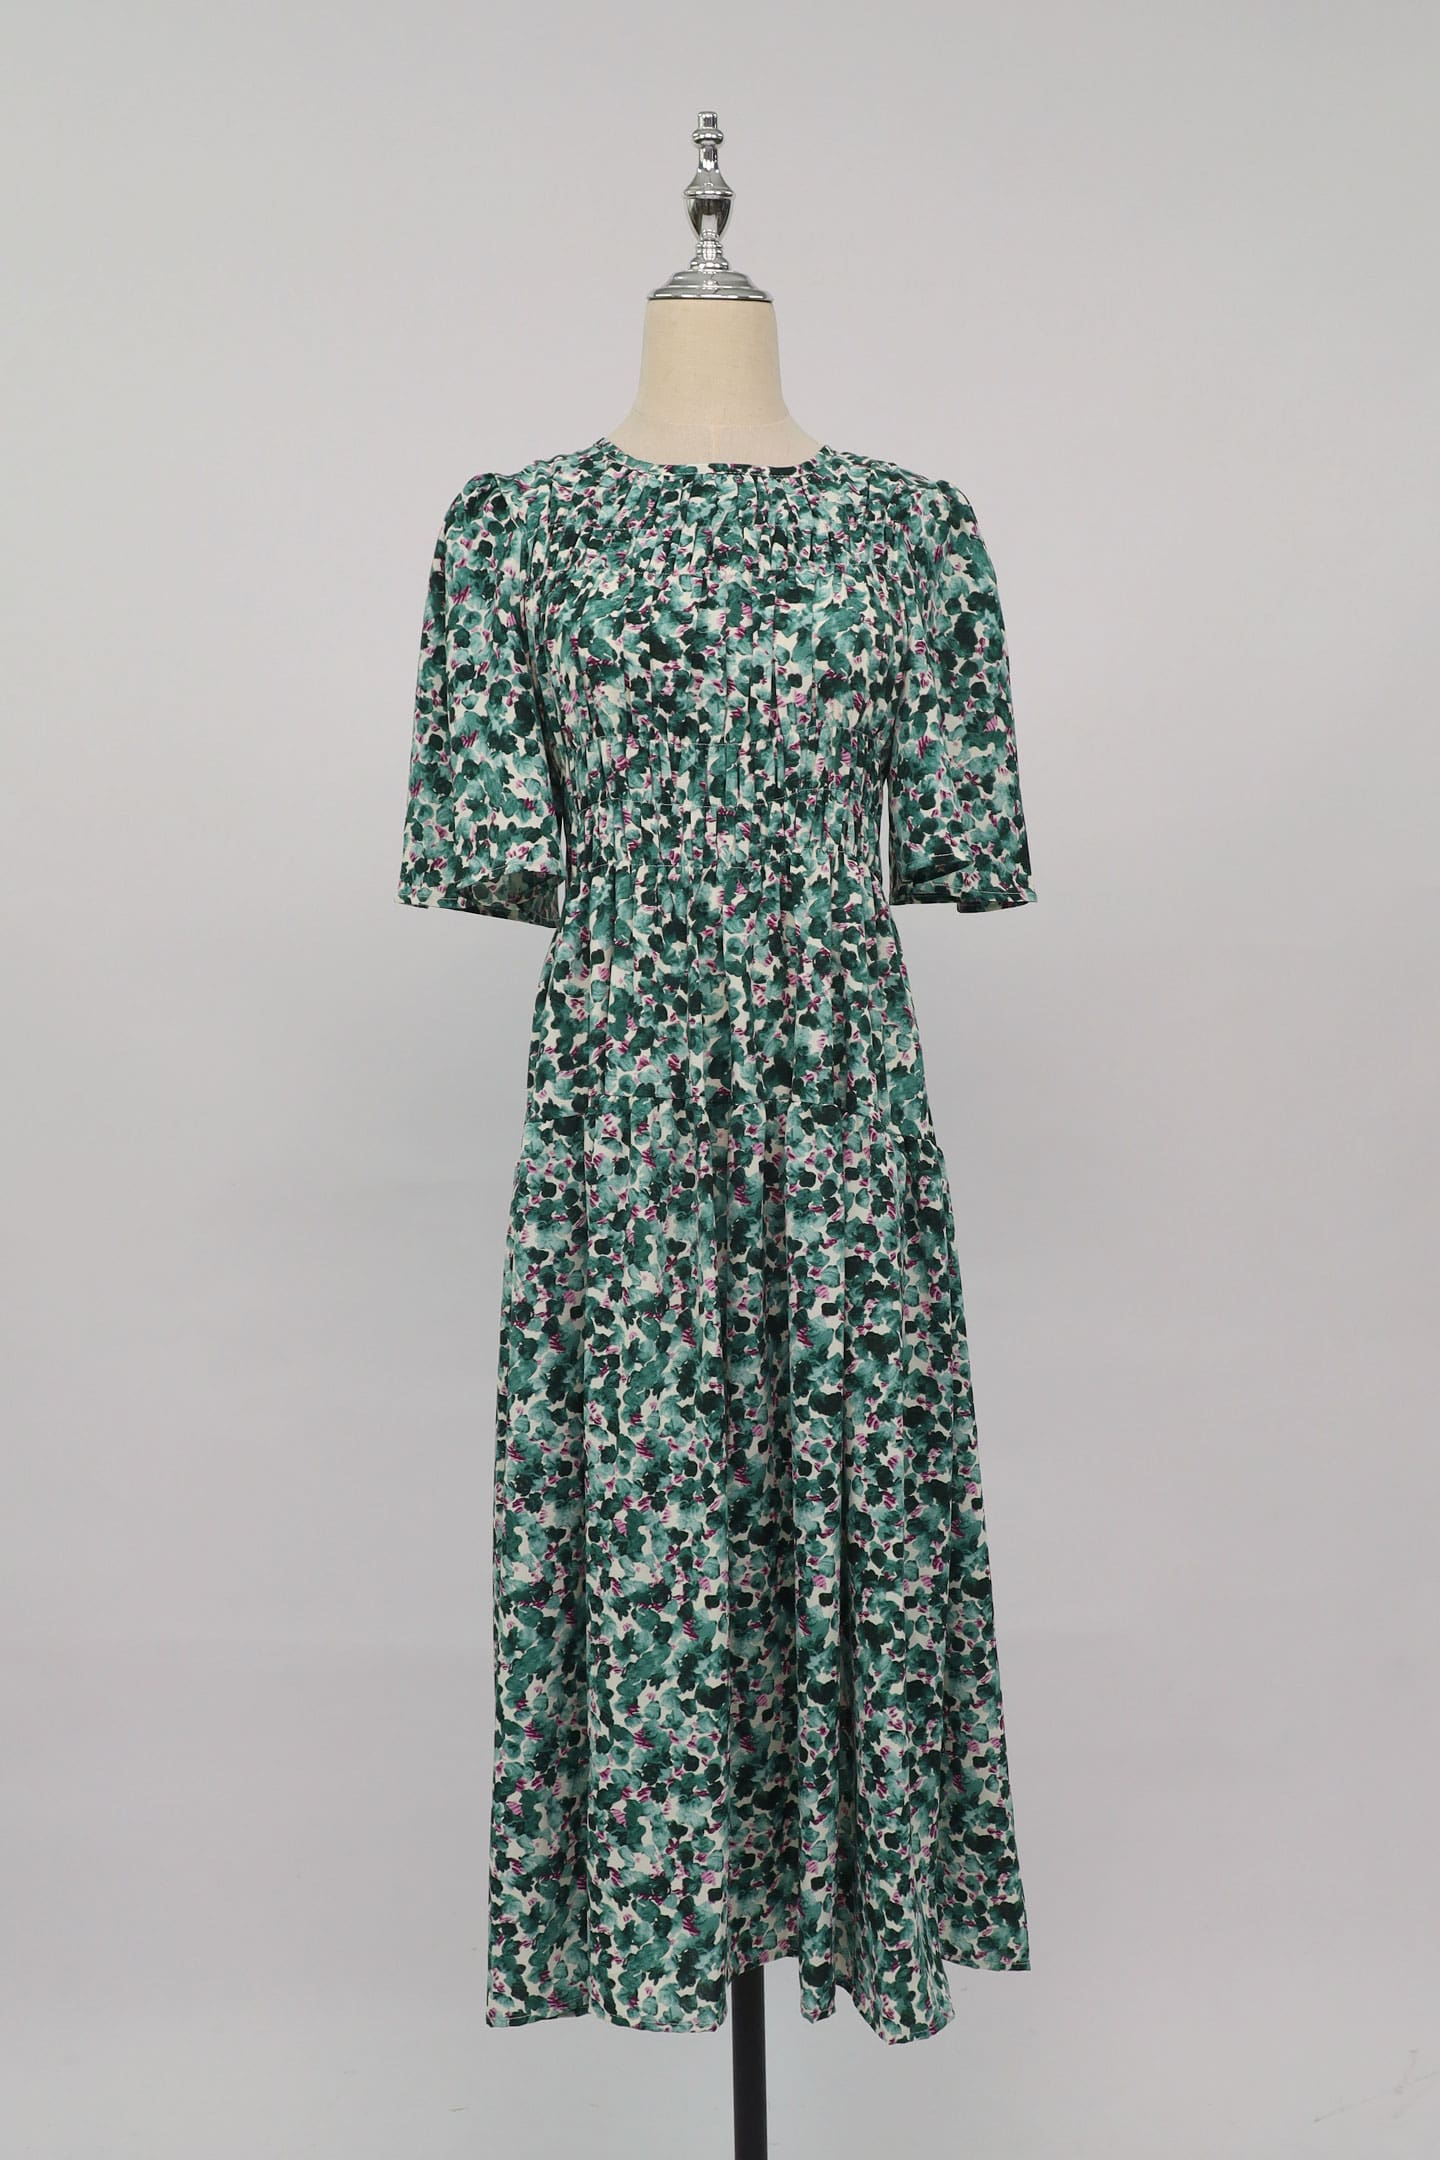 PO - Astha Dress in Green Poppies